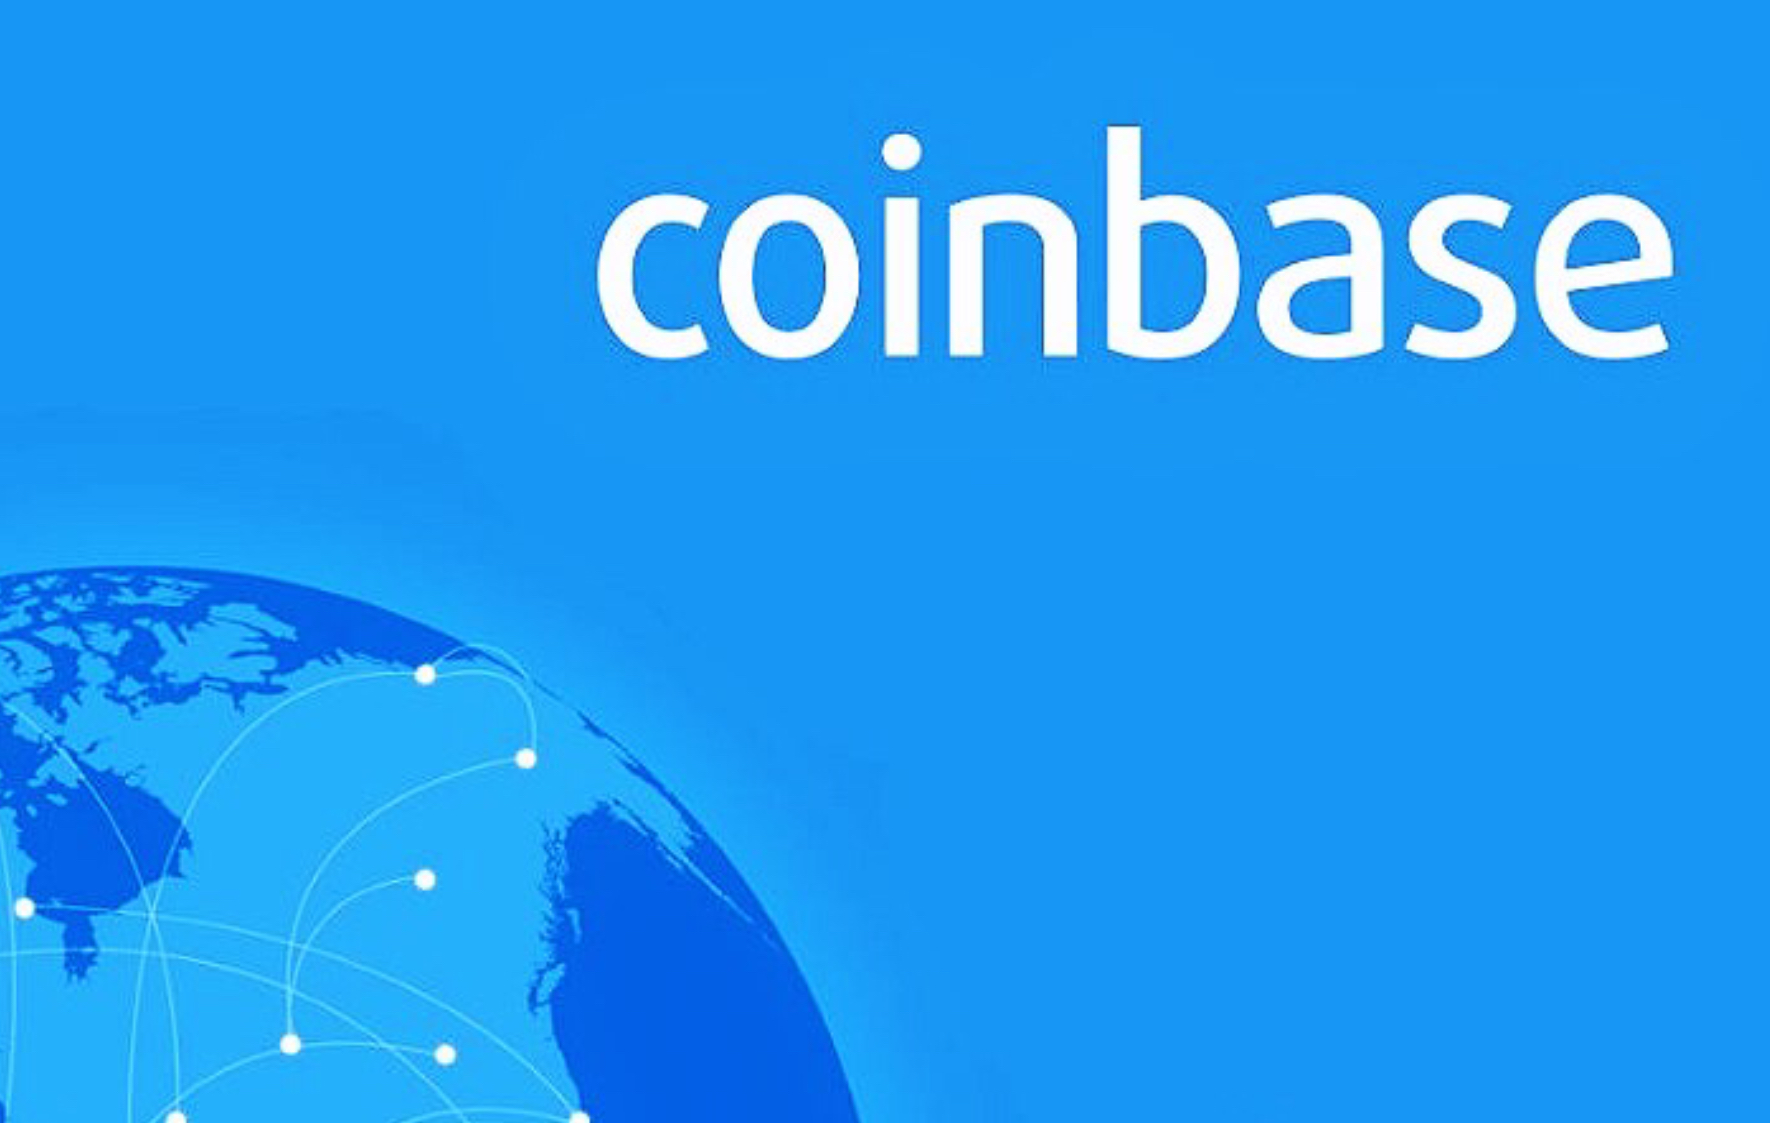 Index Fund Launched By Coinbase Is Officially Open For Accredited U.S. Investors